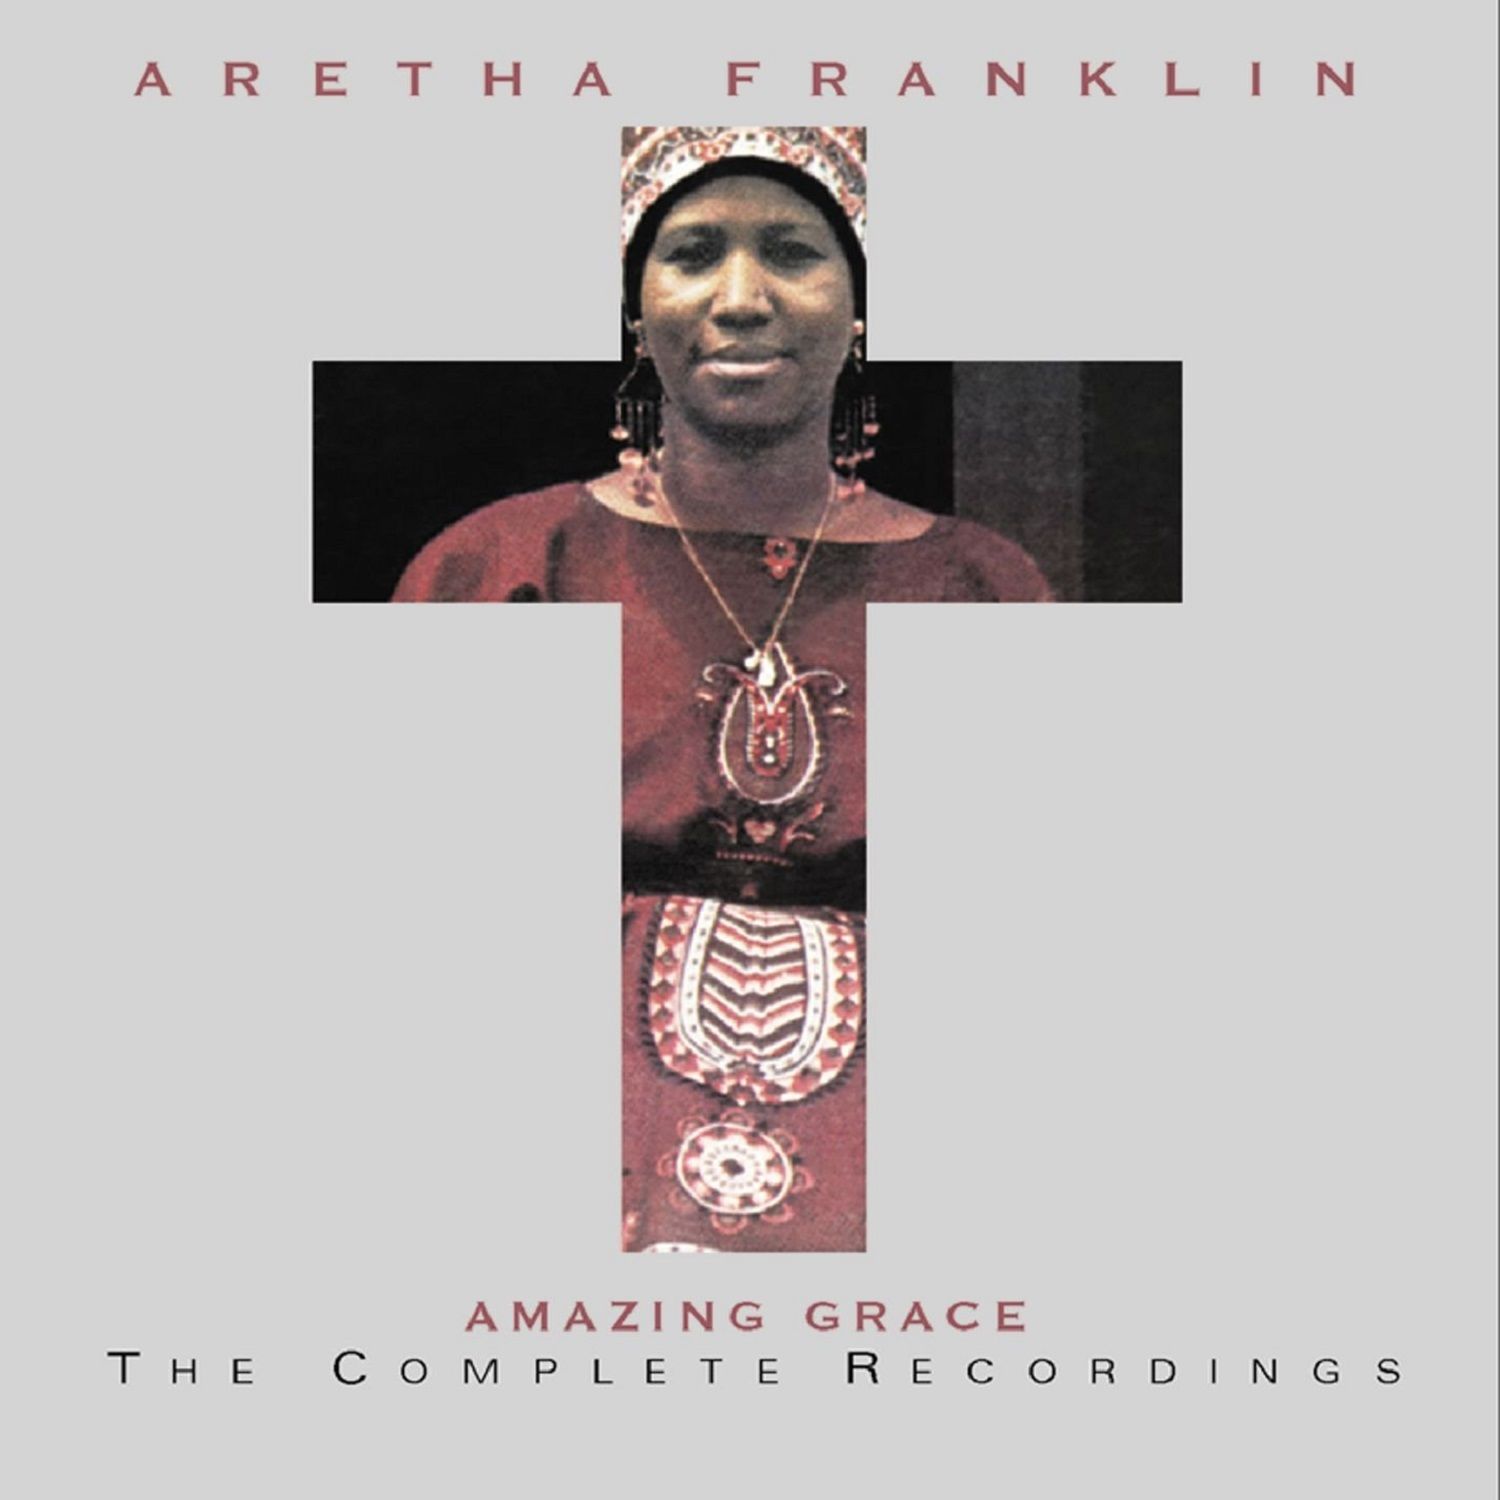 ARETHA FRANKLIN - AMAZING GRACE THE COMPLETE RECORDINGS (2 CD) (1999)